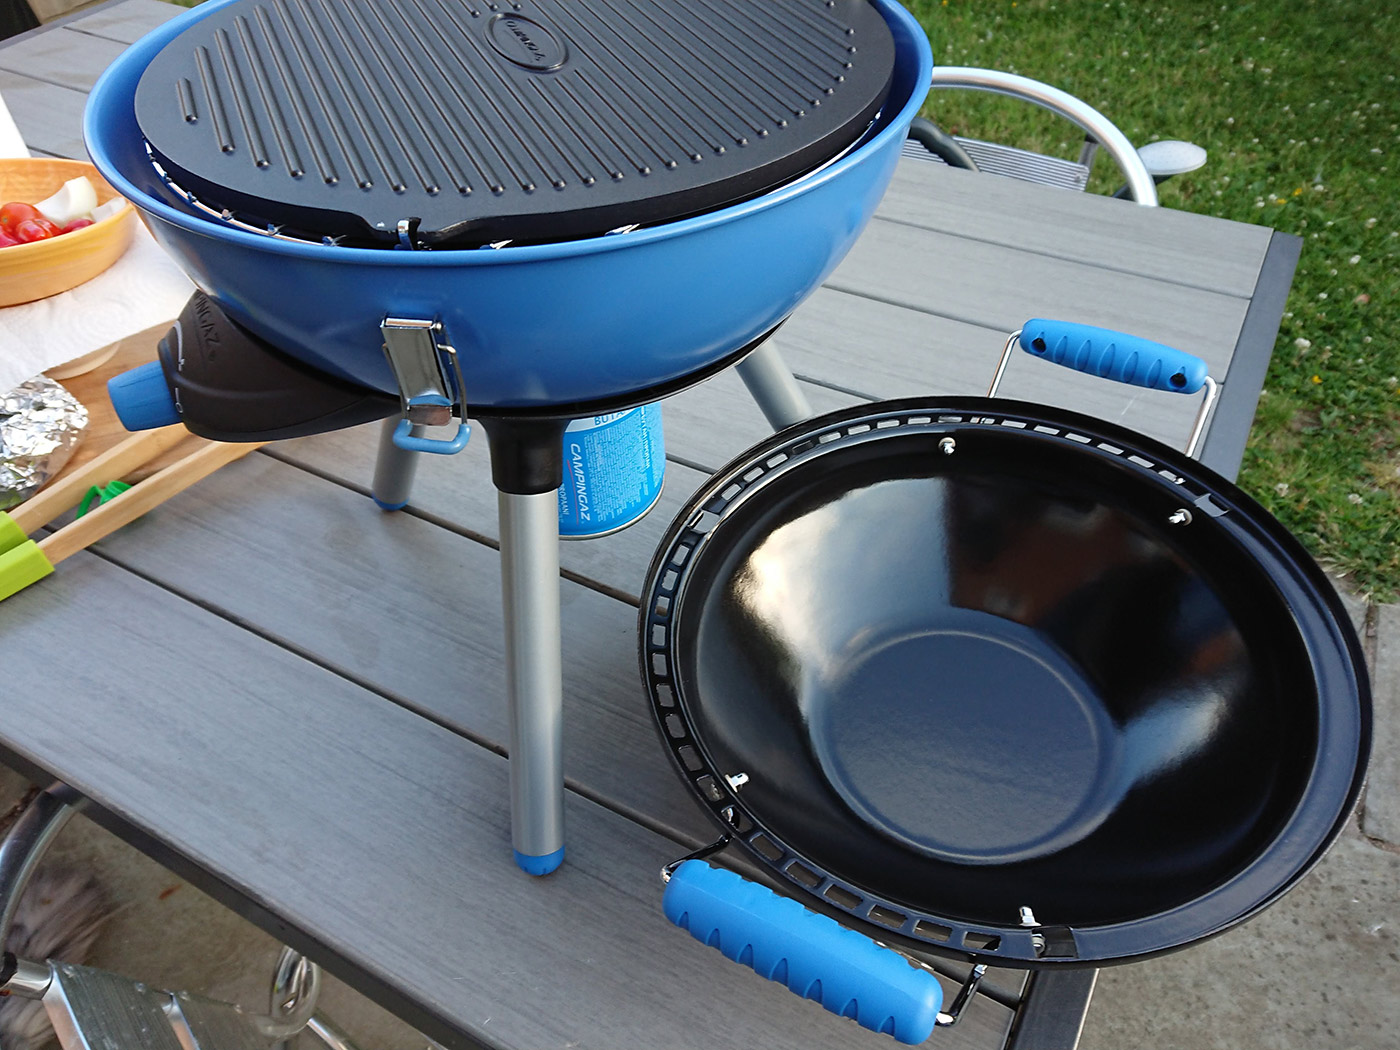 GEAR Putting The Campingaz Grill To The Test